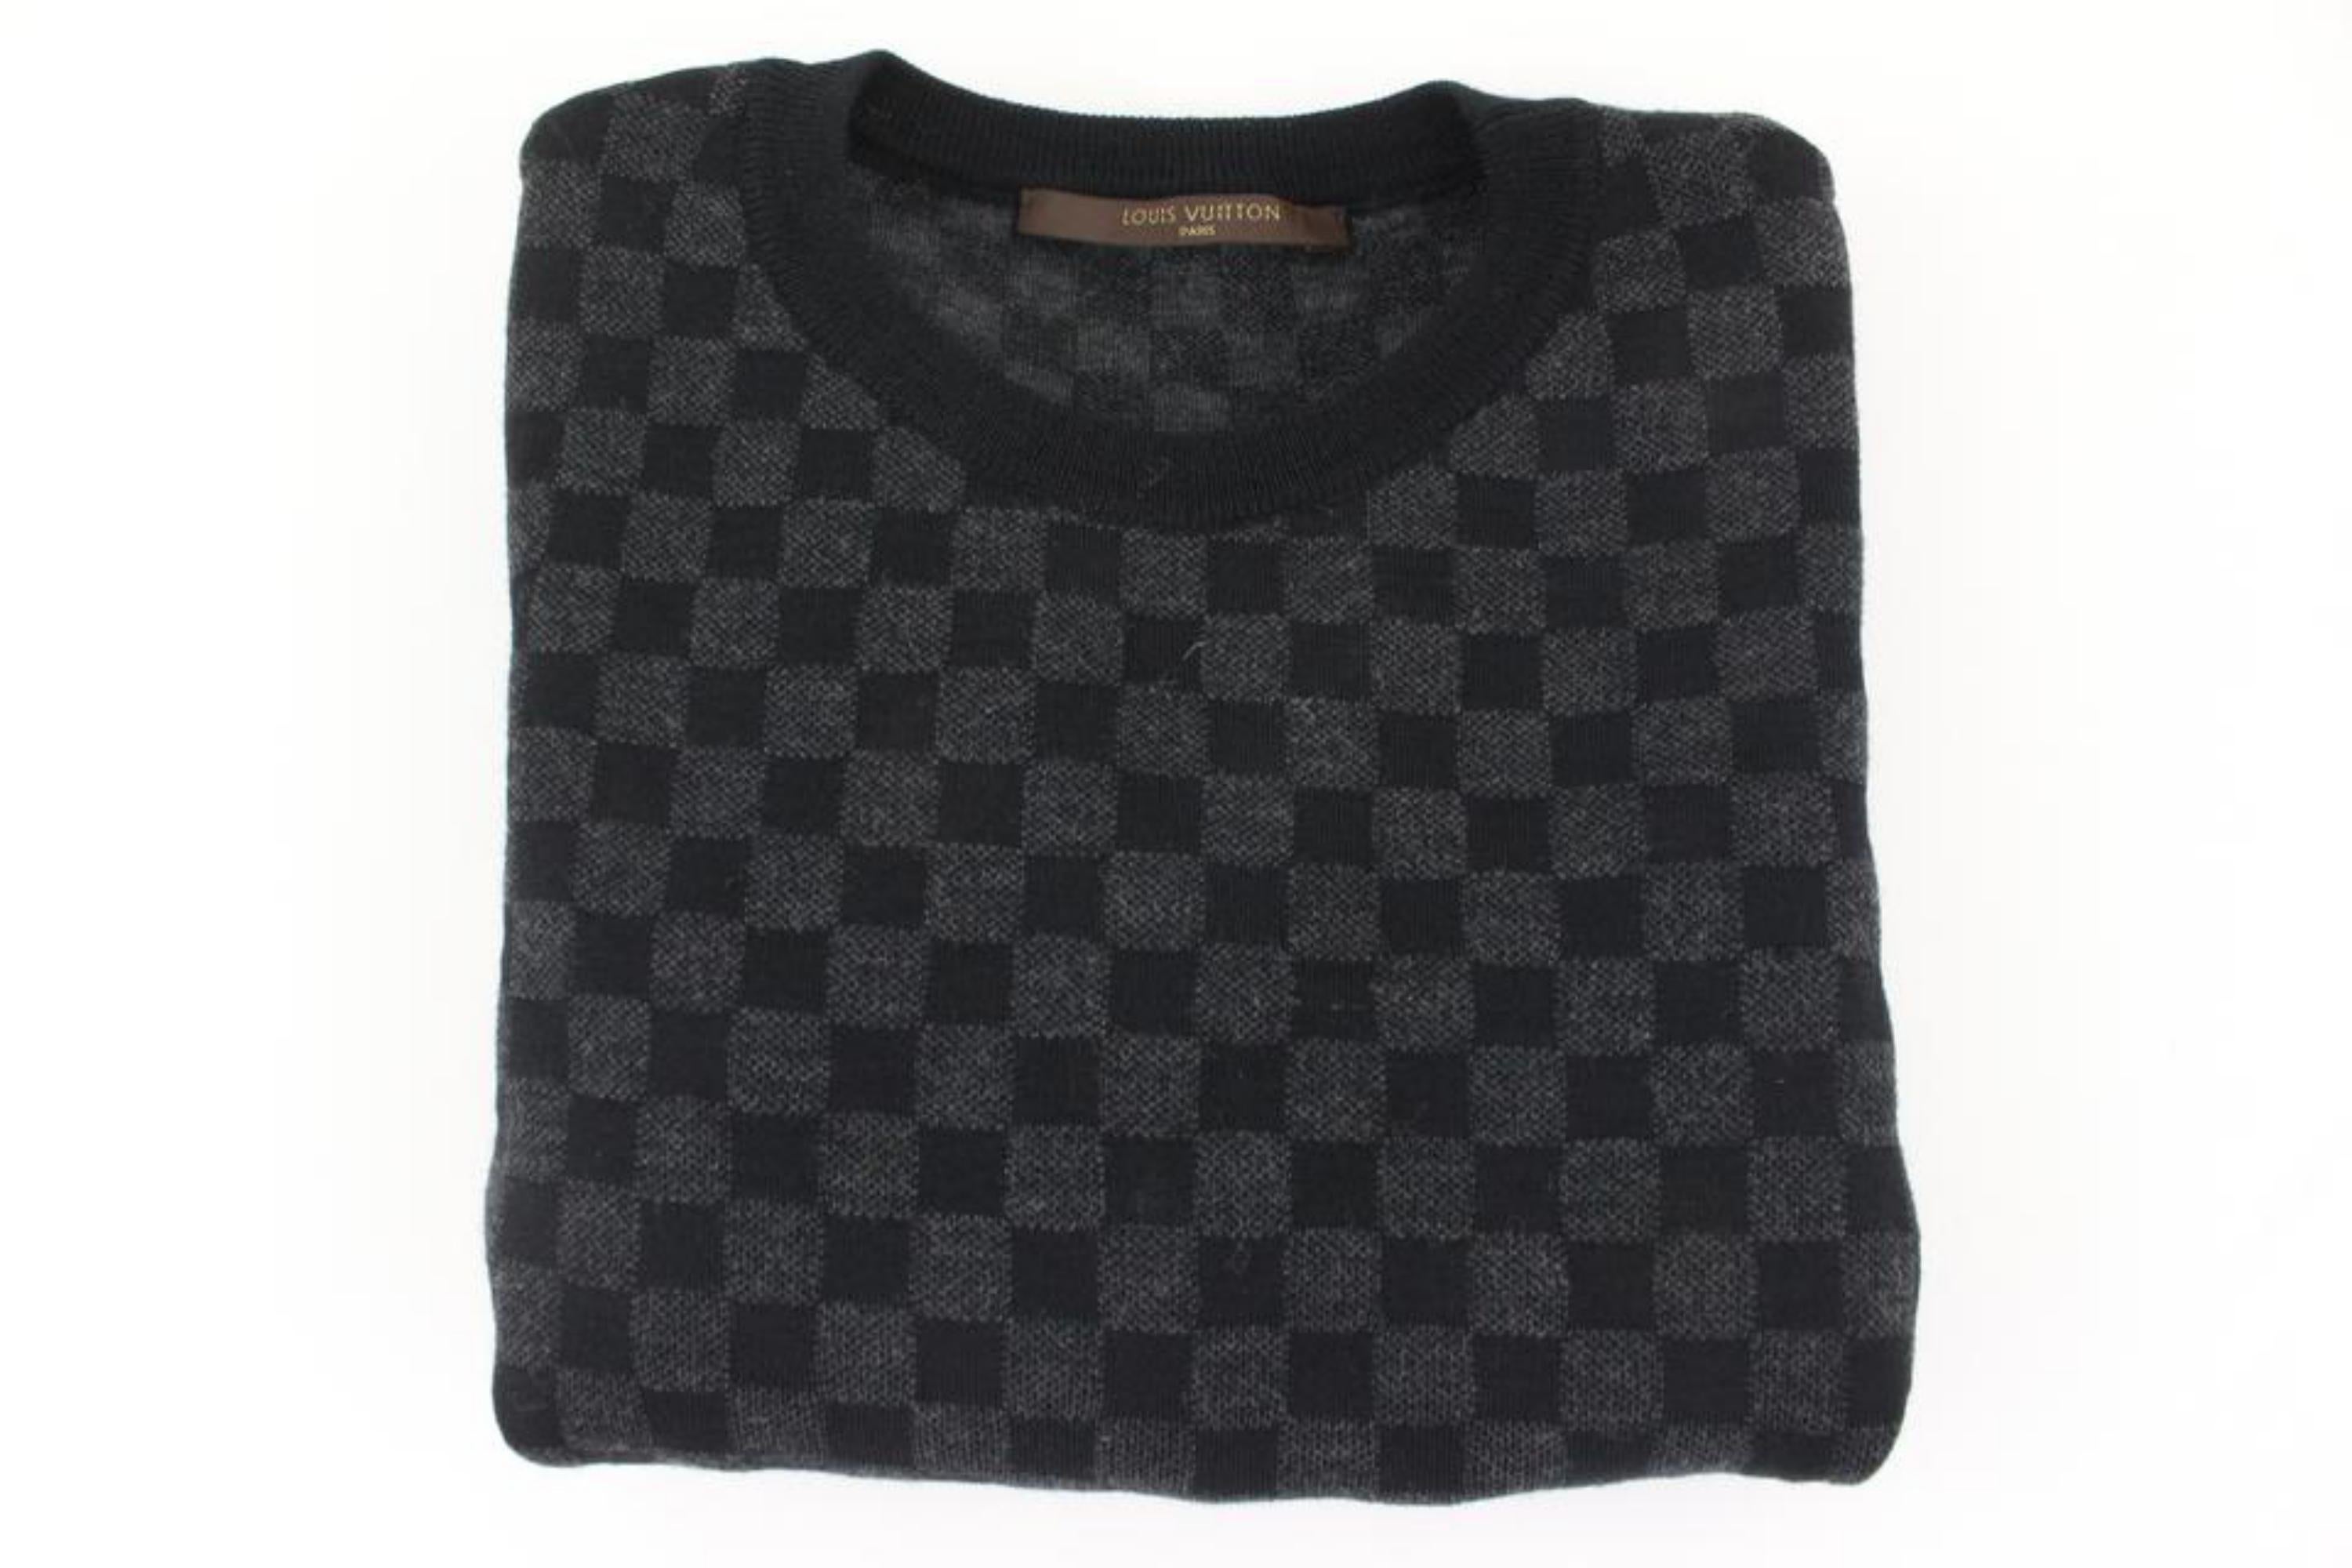 Louis Vuitton Ultra Rare Boys Size 8 Damier Graphite Sweater 77lv33s In Excellent Condition For Sale In Dix hills, NY